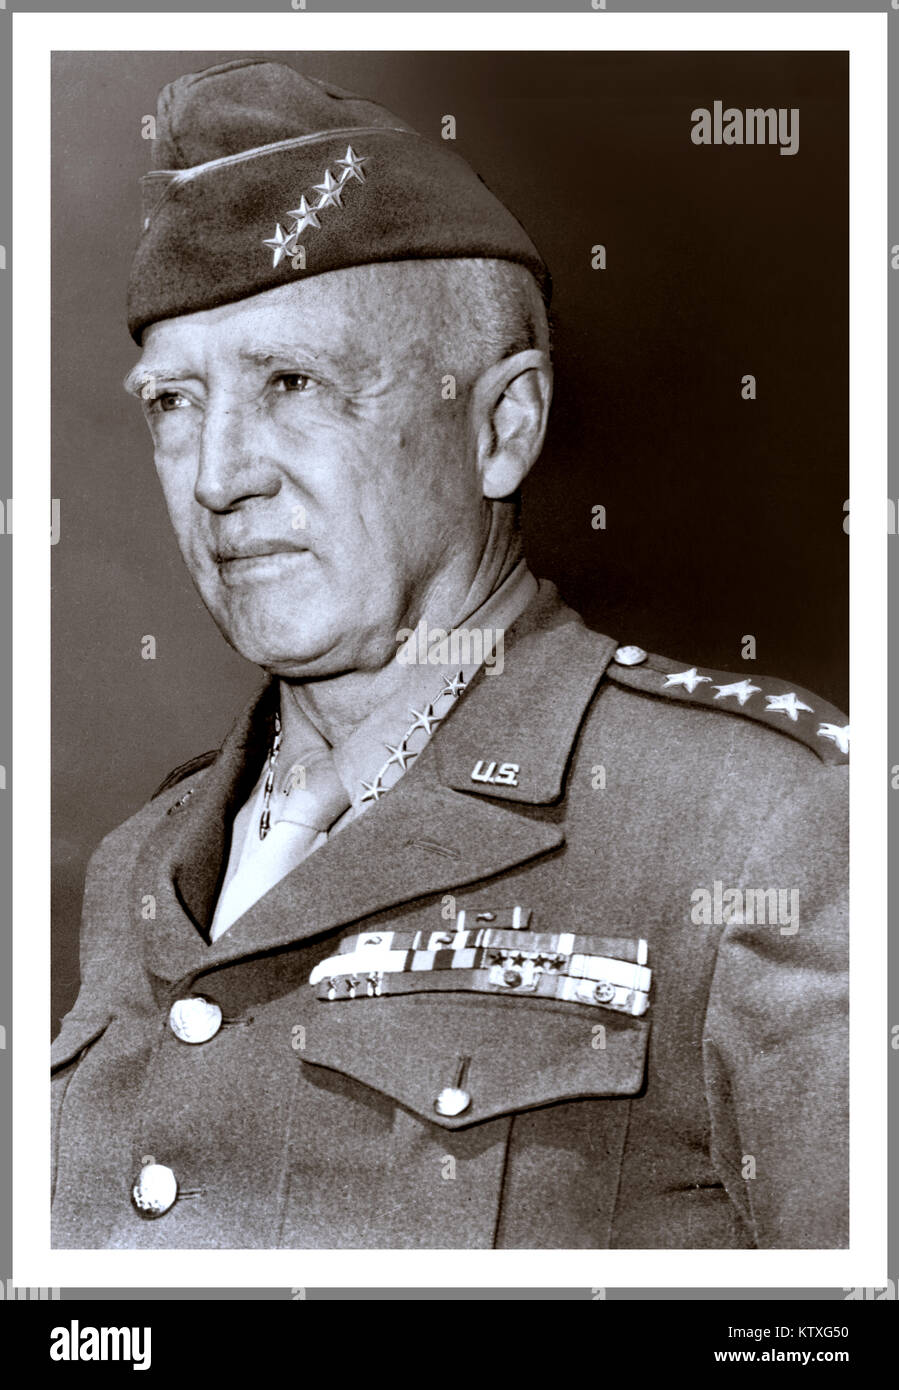 4 Star General George Smith Patton Jr. was a senior officer of the United States Army who commanded the U.S. Seventh Army in the Mediterranean and European theaters of World War II, Stock Photo